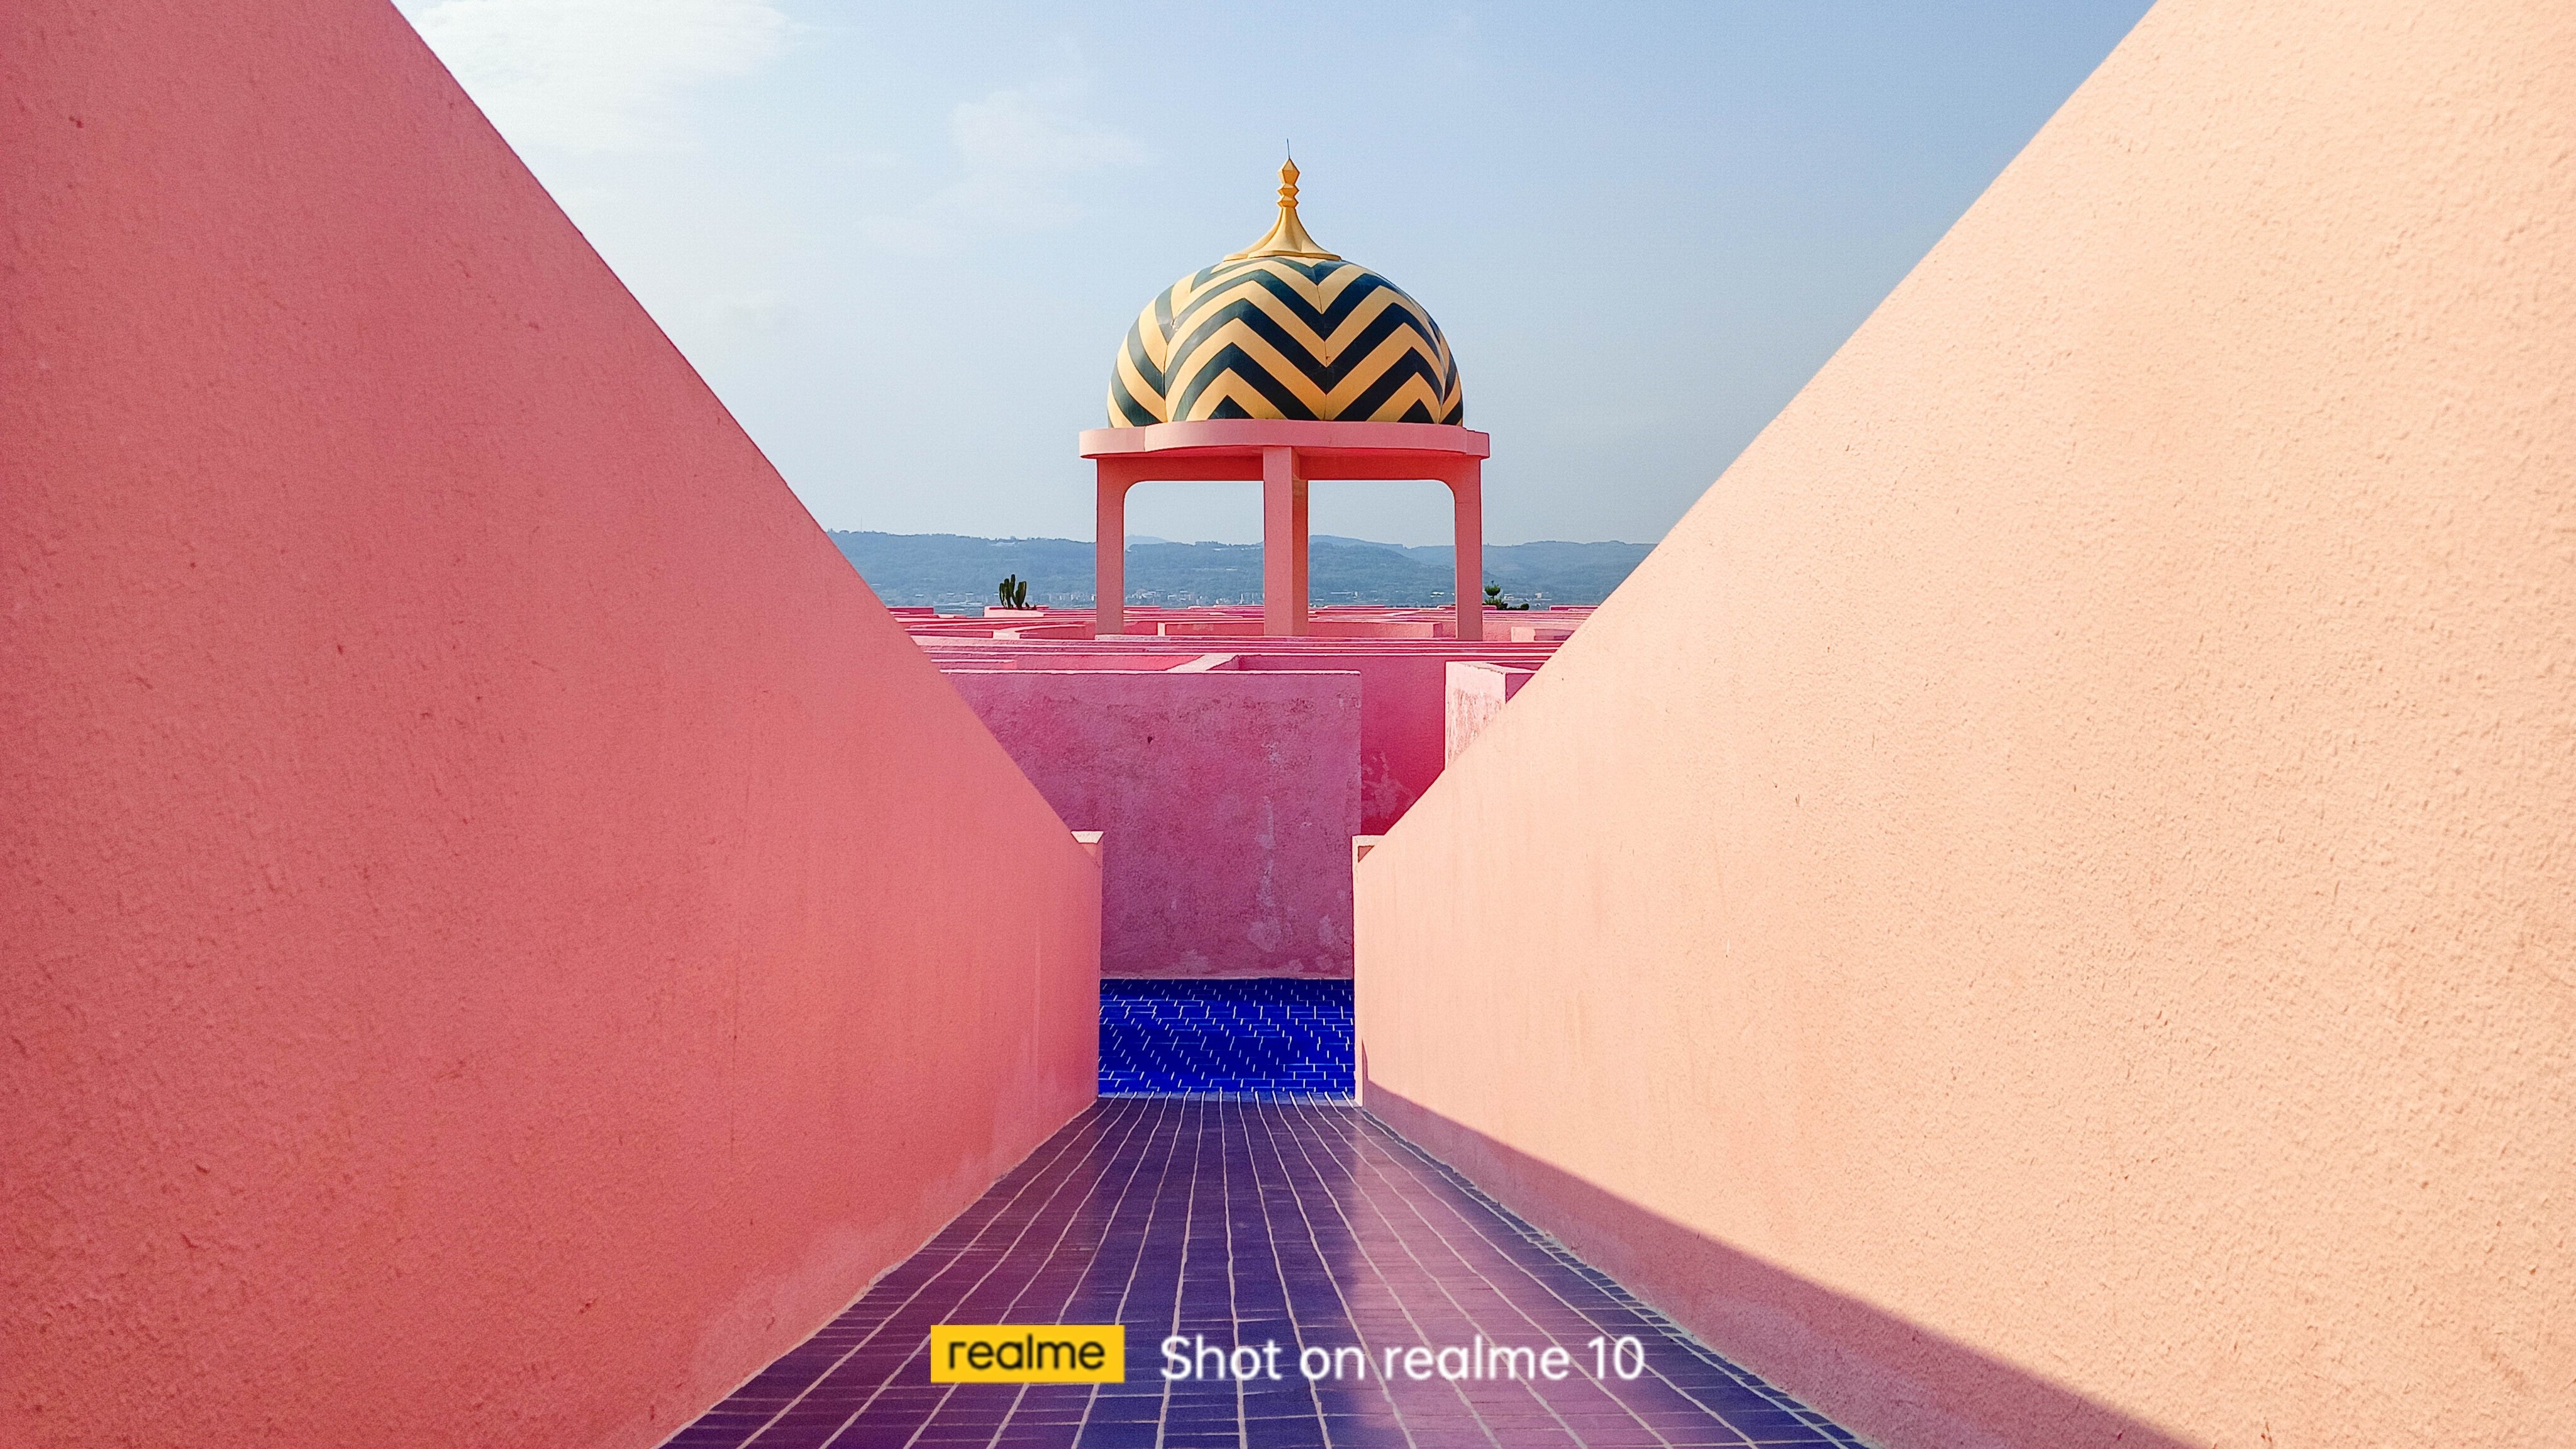 Realme 10's camera sample shared by the company ahead of launch